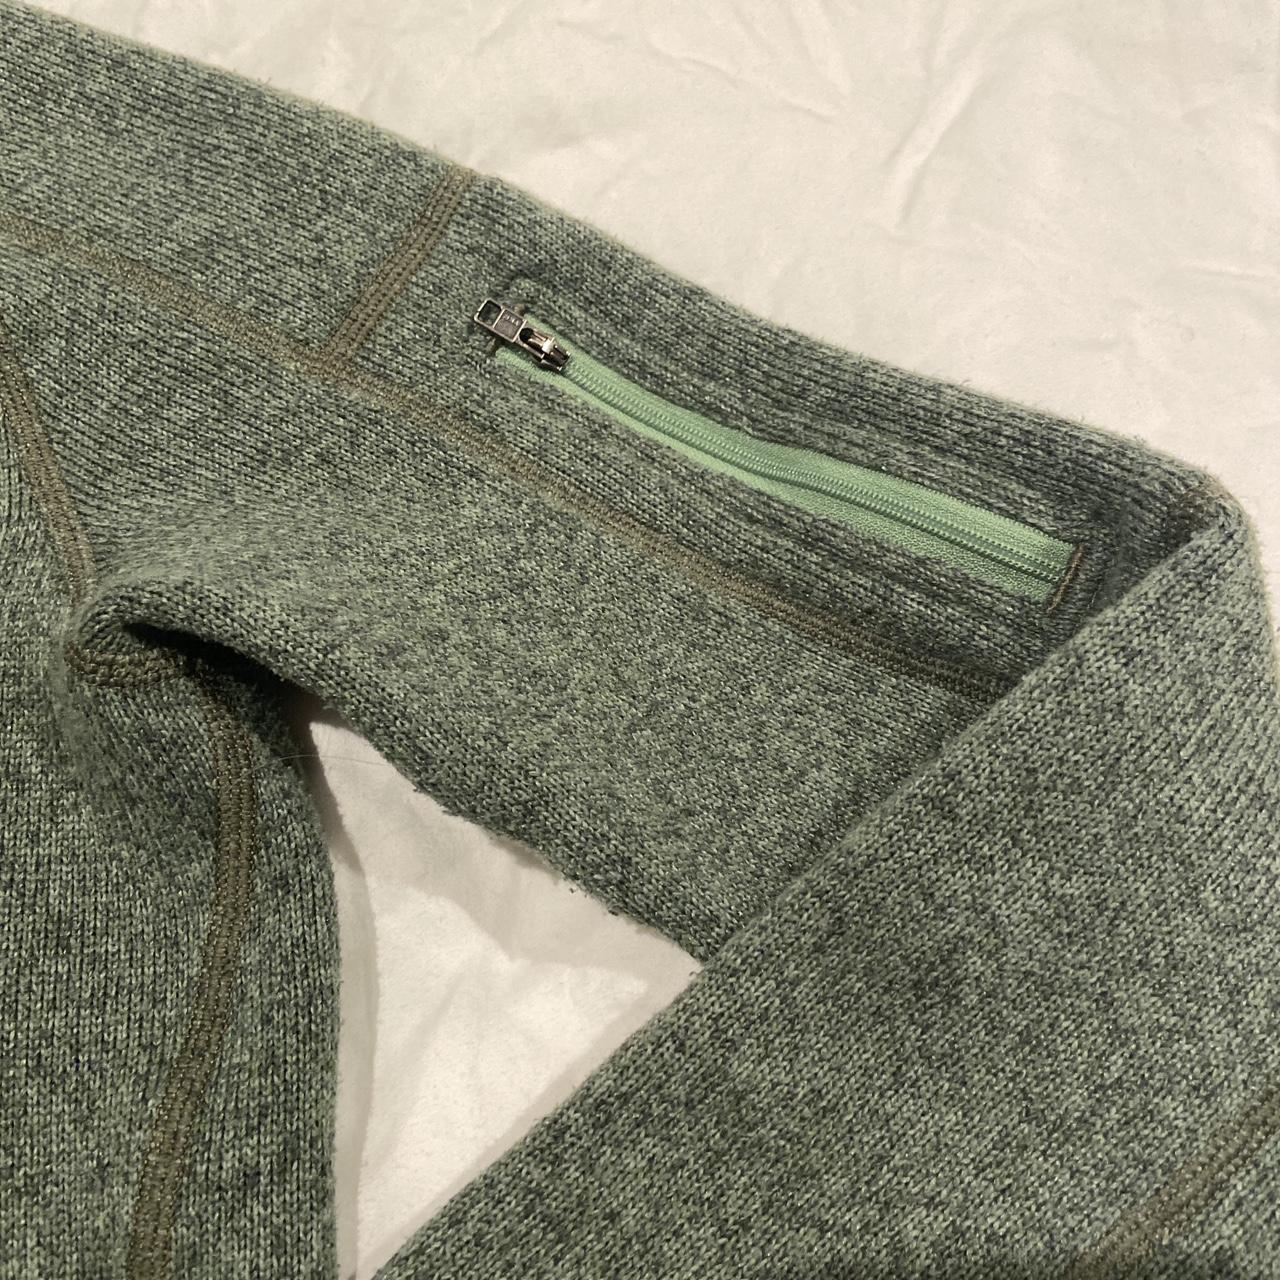 Patagonia quarter-zip in green/forest with arm... - Depop